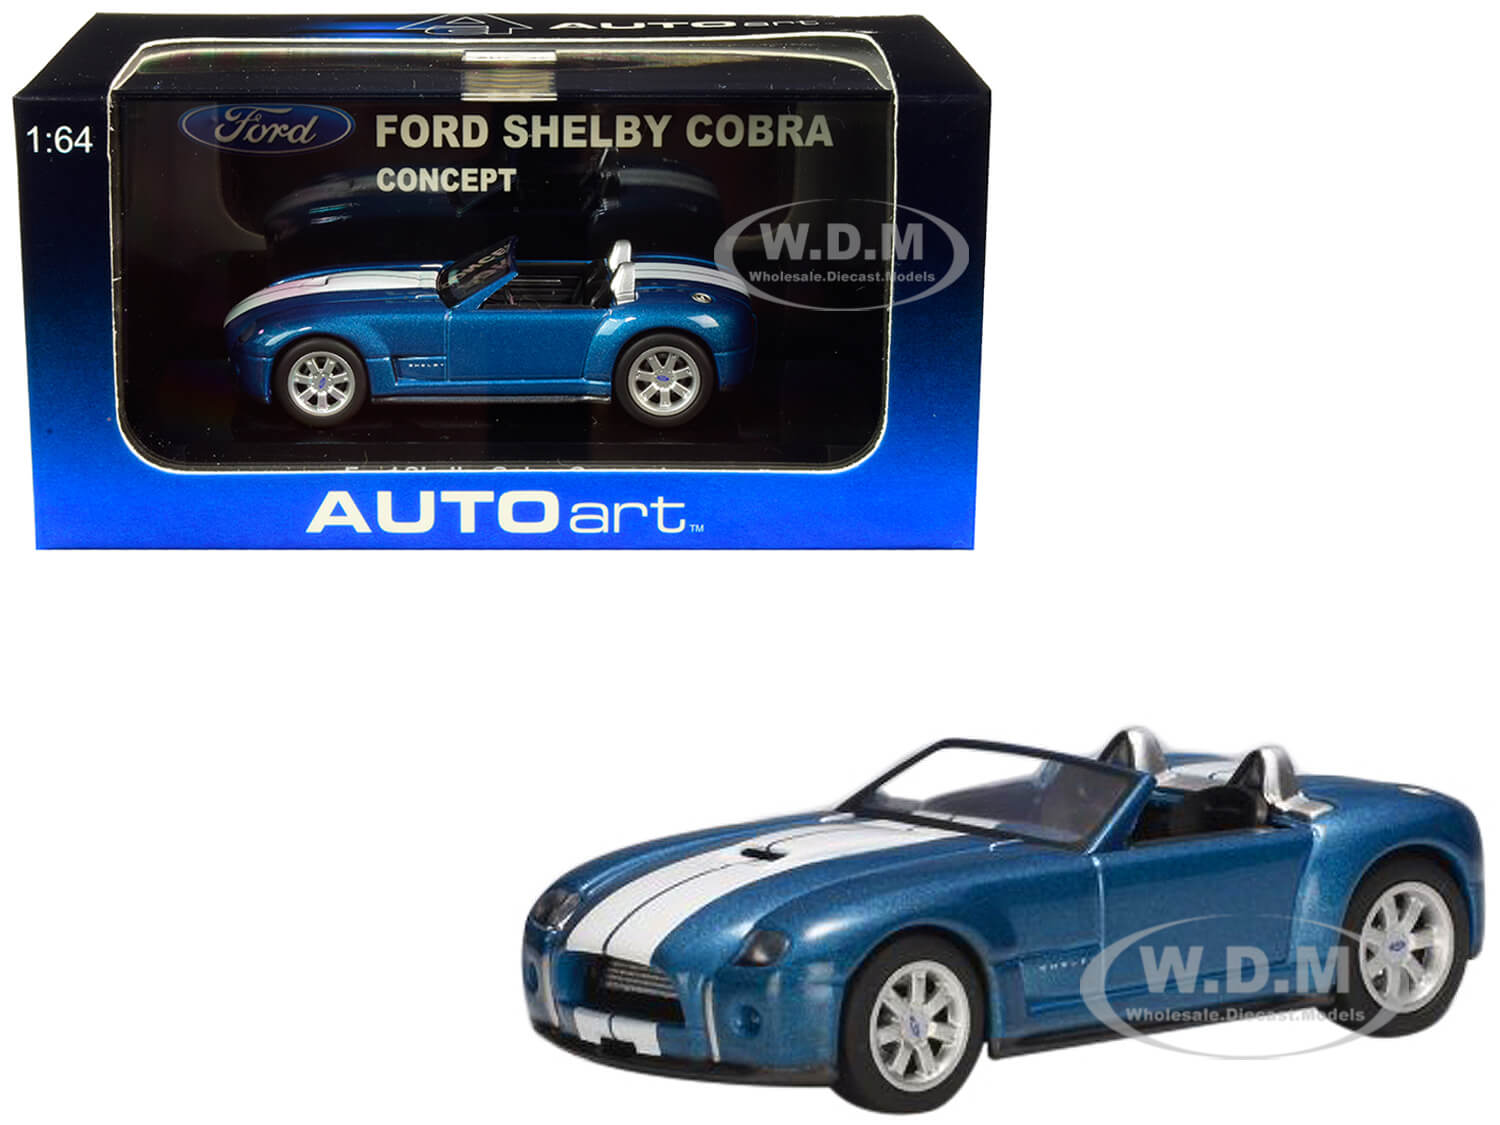 2004 Ford Shelby Cobra Concept Guardsman Blue Metallic With Performance White Stripes 1/64 Diecast Model Car By Autoart